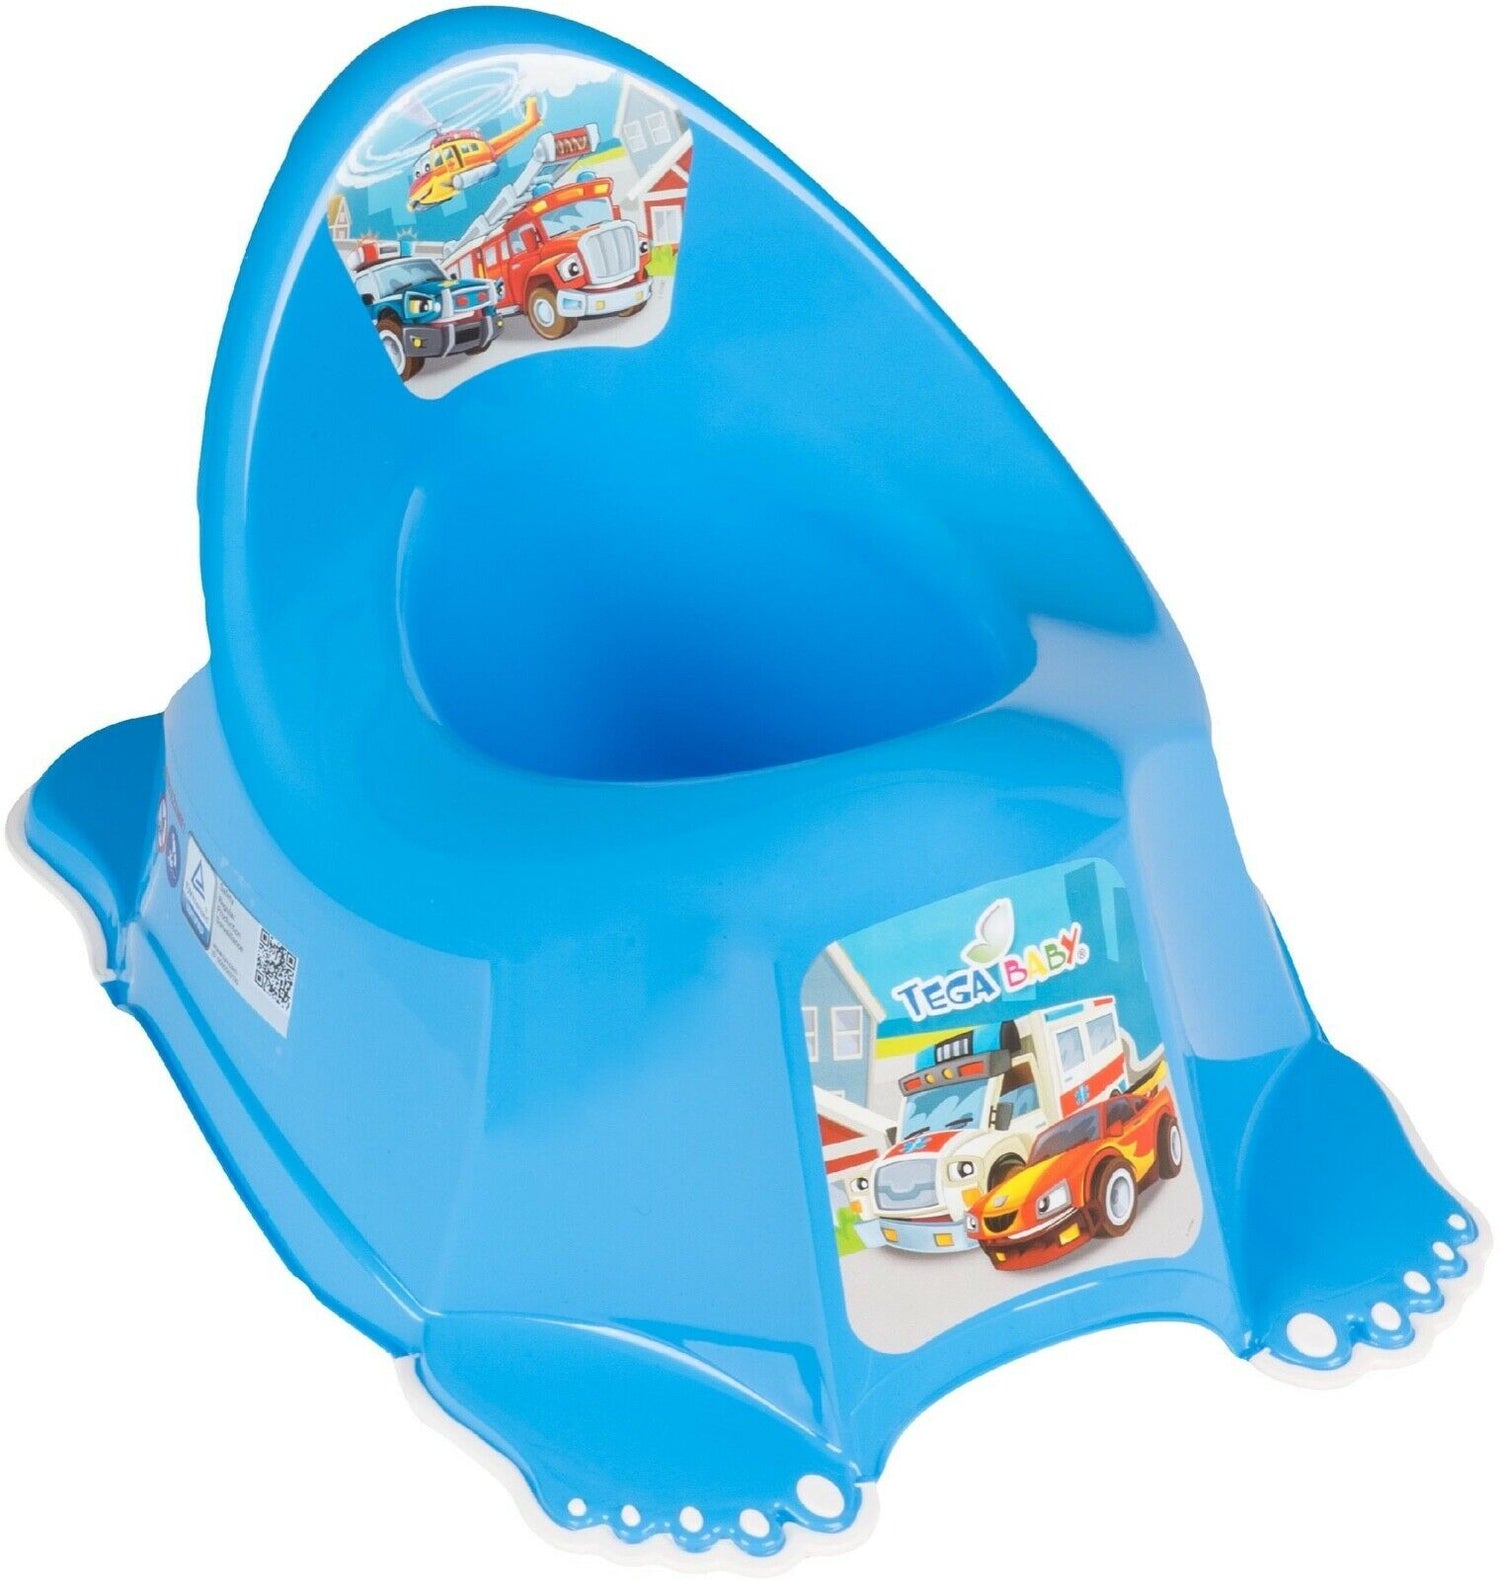 Baby Toilet Potty Chair Toodler Kids Training Seat Safe Non-Slip Cars Blue